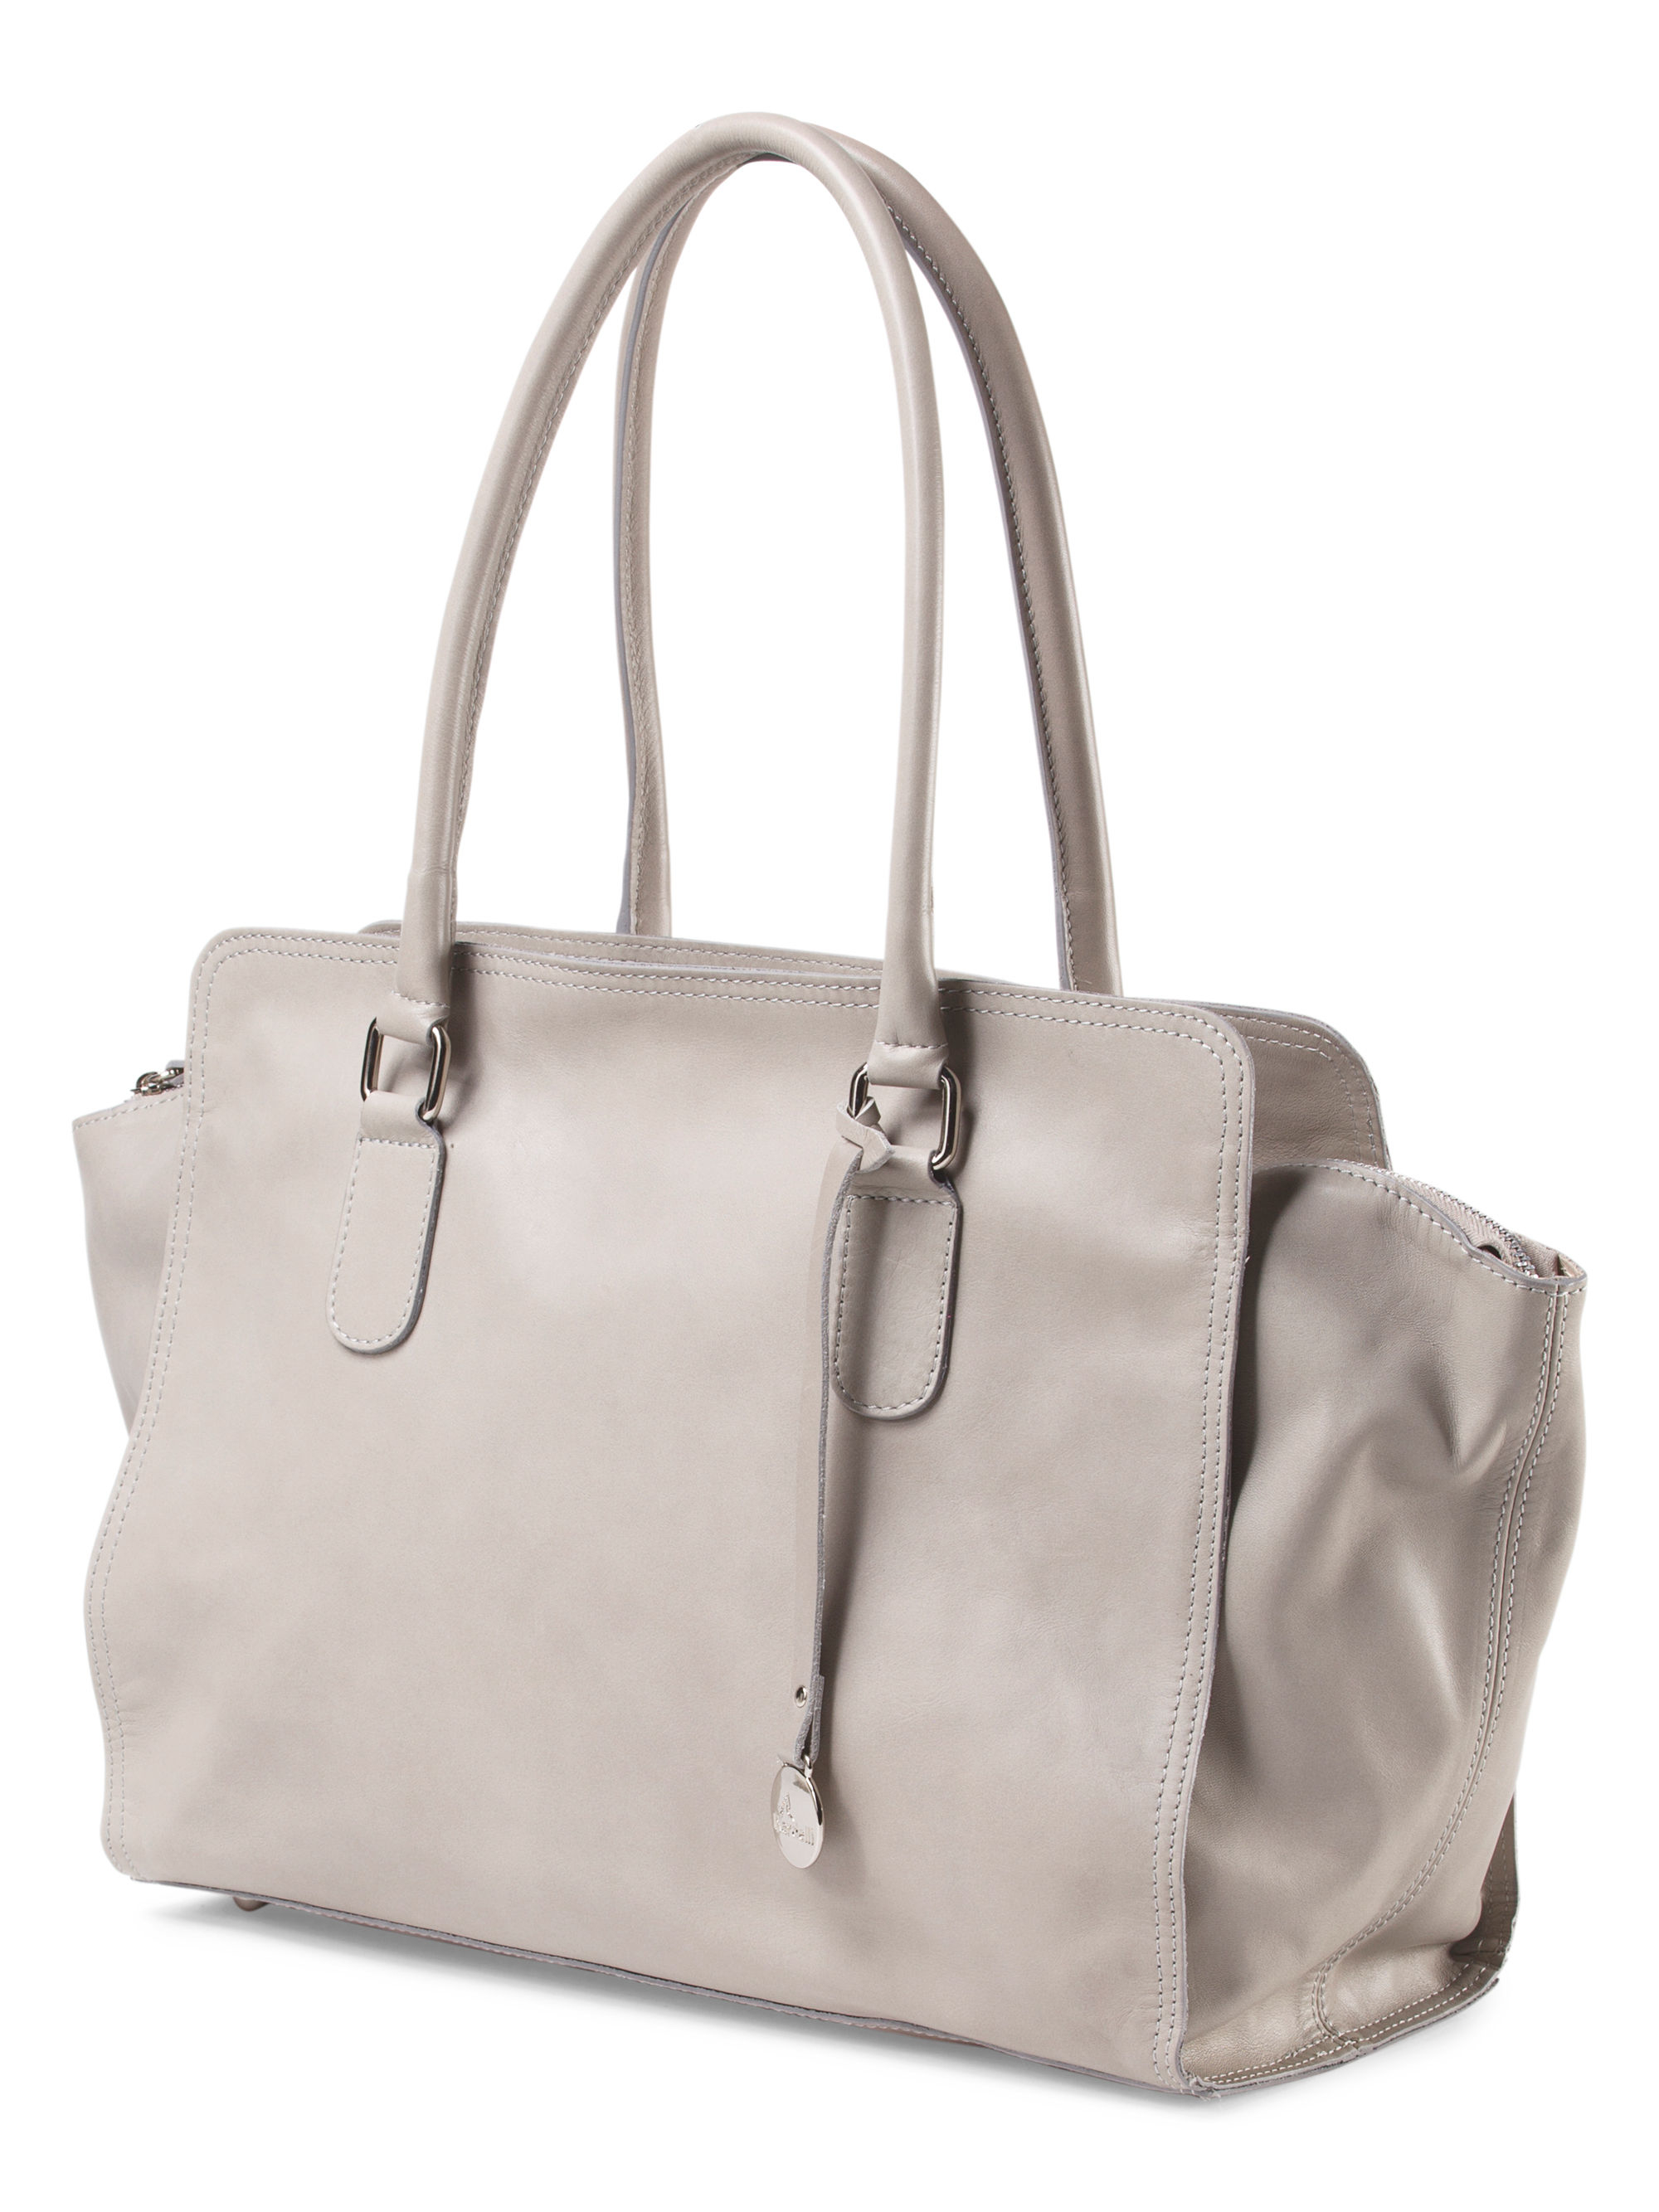 Lyst - Tj Maxx Made In Italy Leather East West Tote